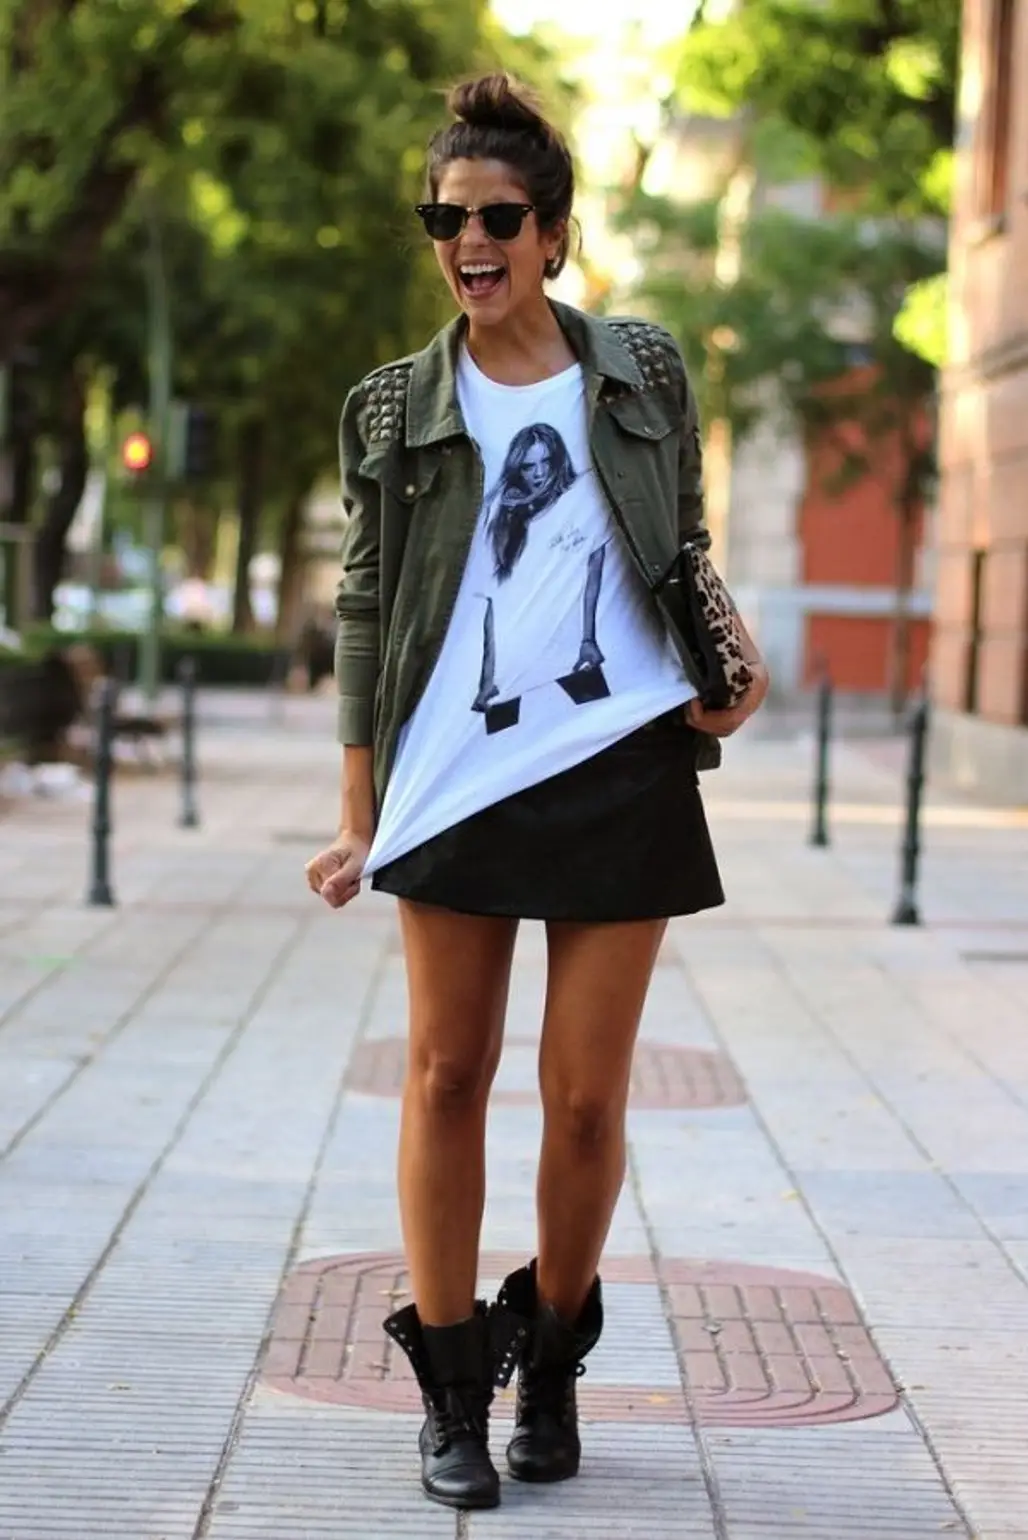 7 Streetstyle Ways to Wear Converse and Rock It